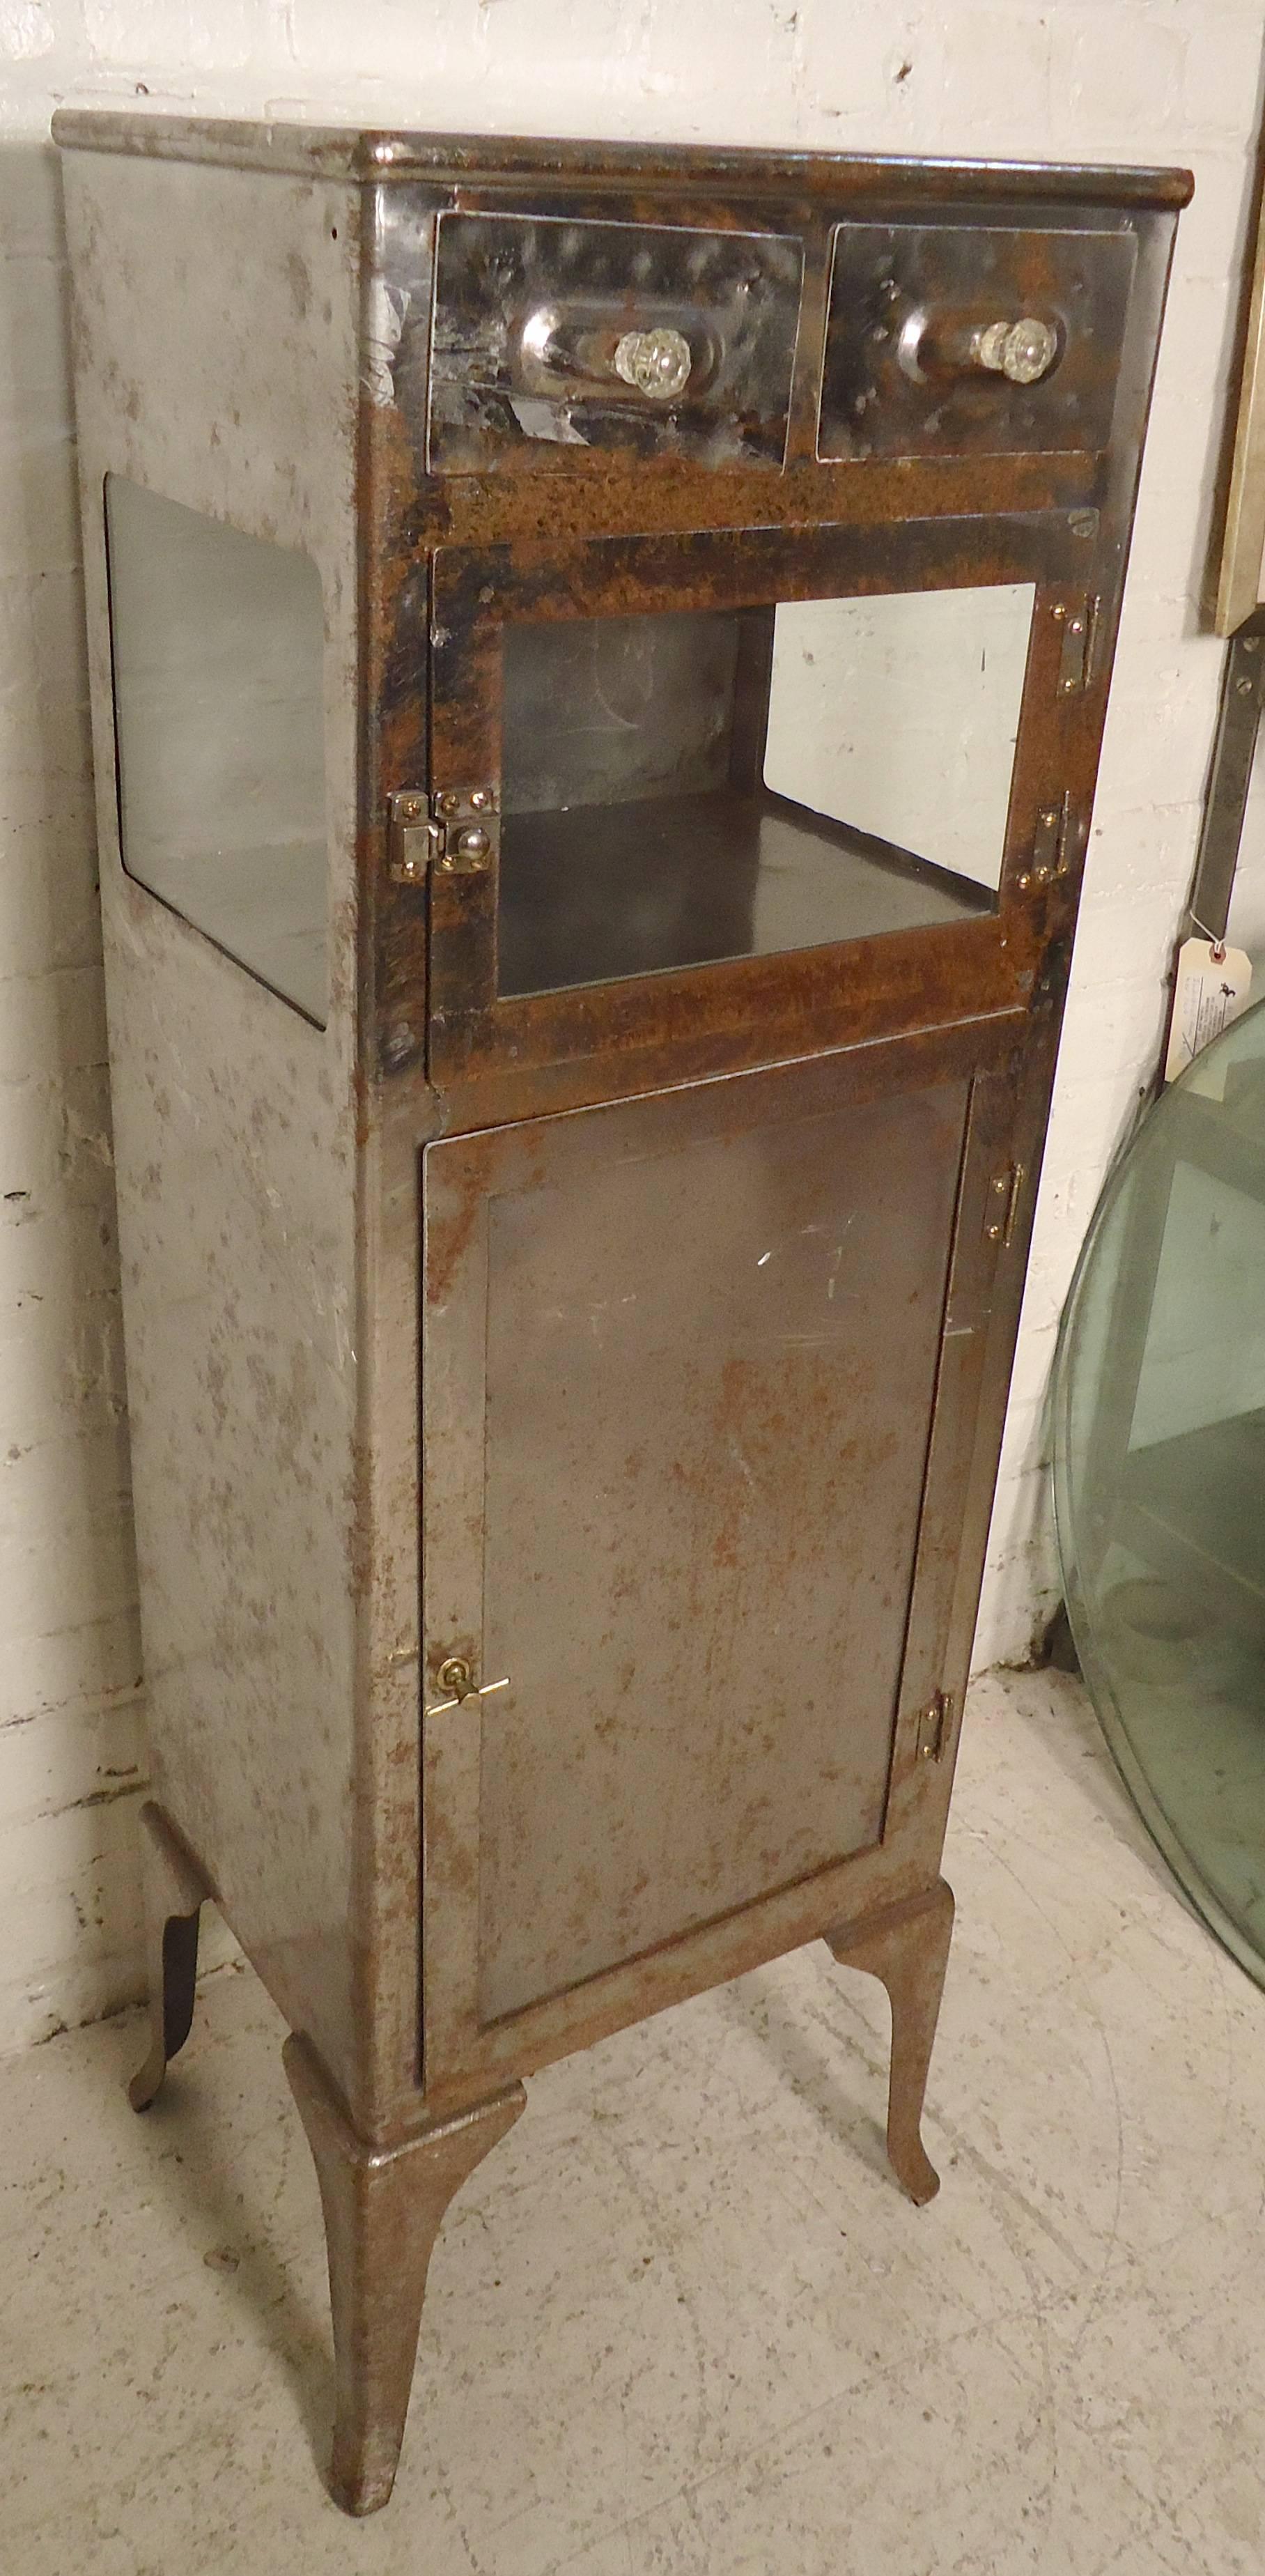 Petite metal cabinet perfect for bathroom storage. Two cabinet spaces, one with glass front and sides. Piece has been refinished in a bare metal style.

(Please confirm item location NY or NJ with dealer).
  